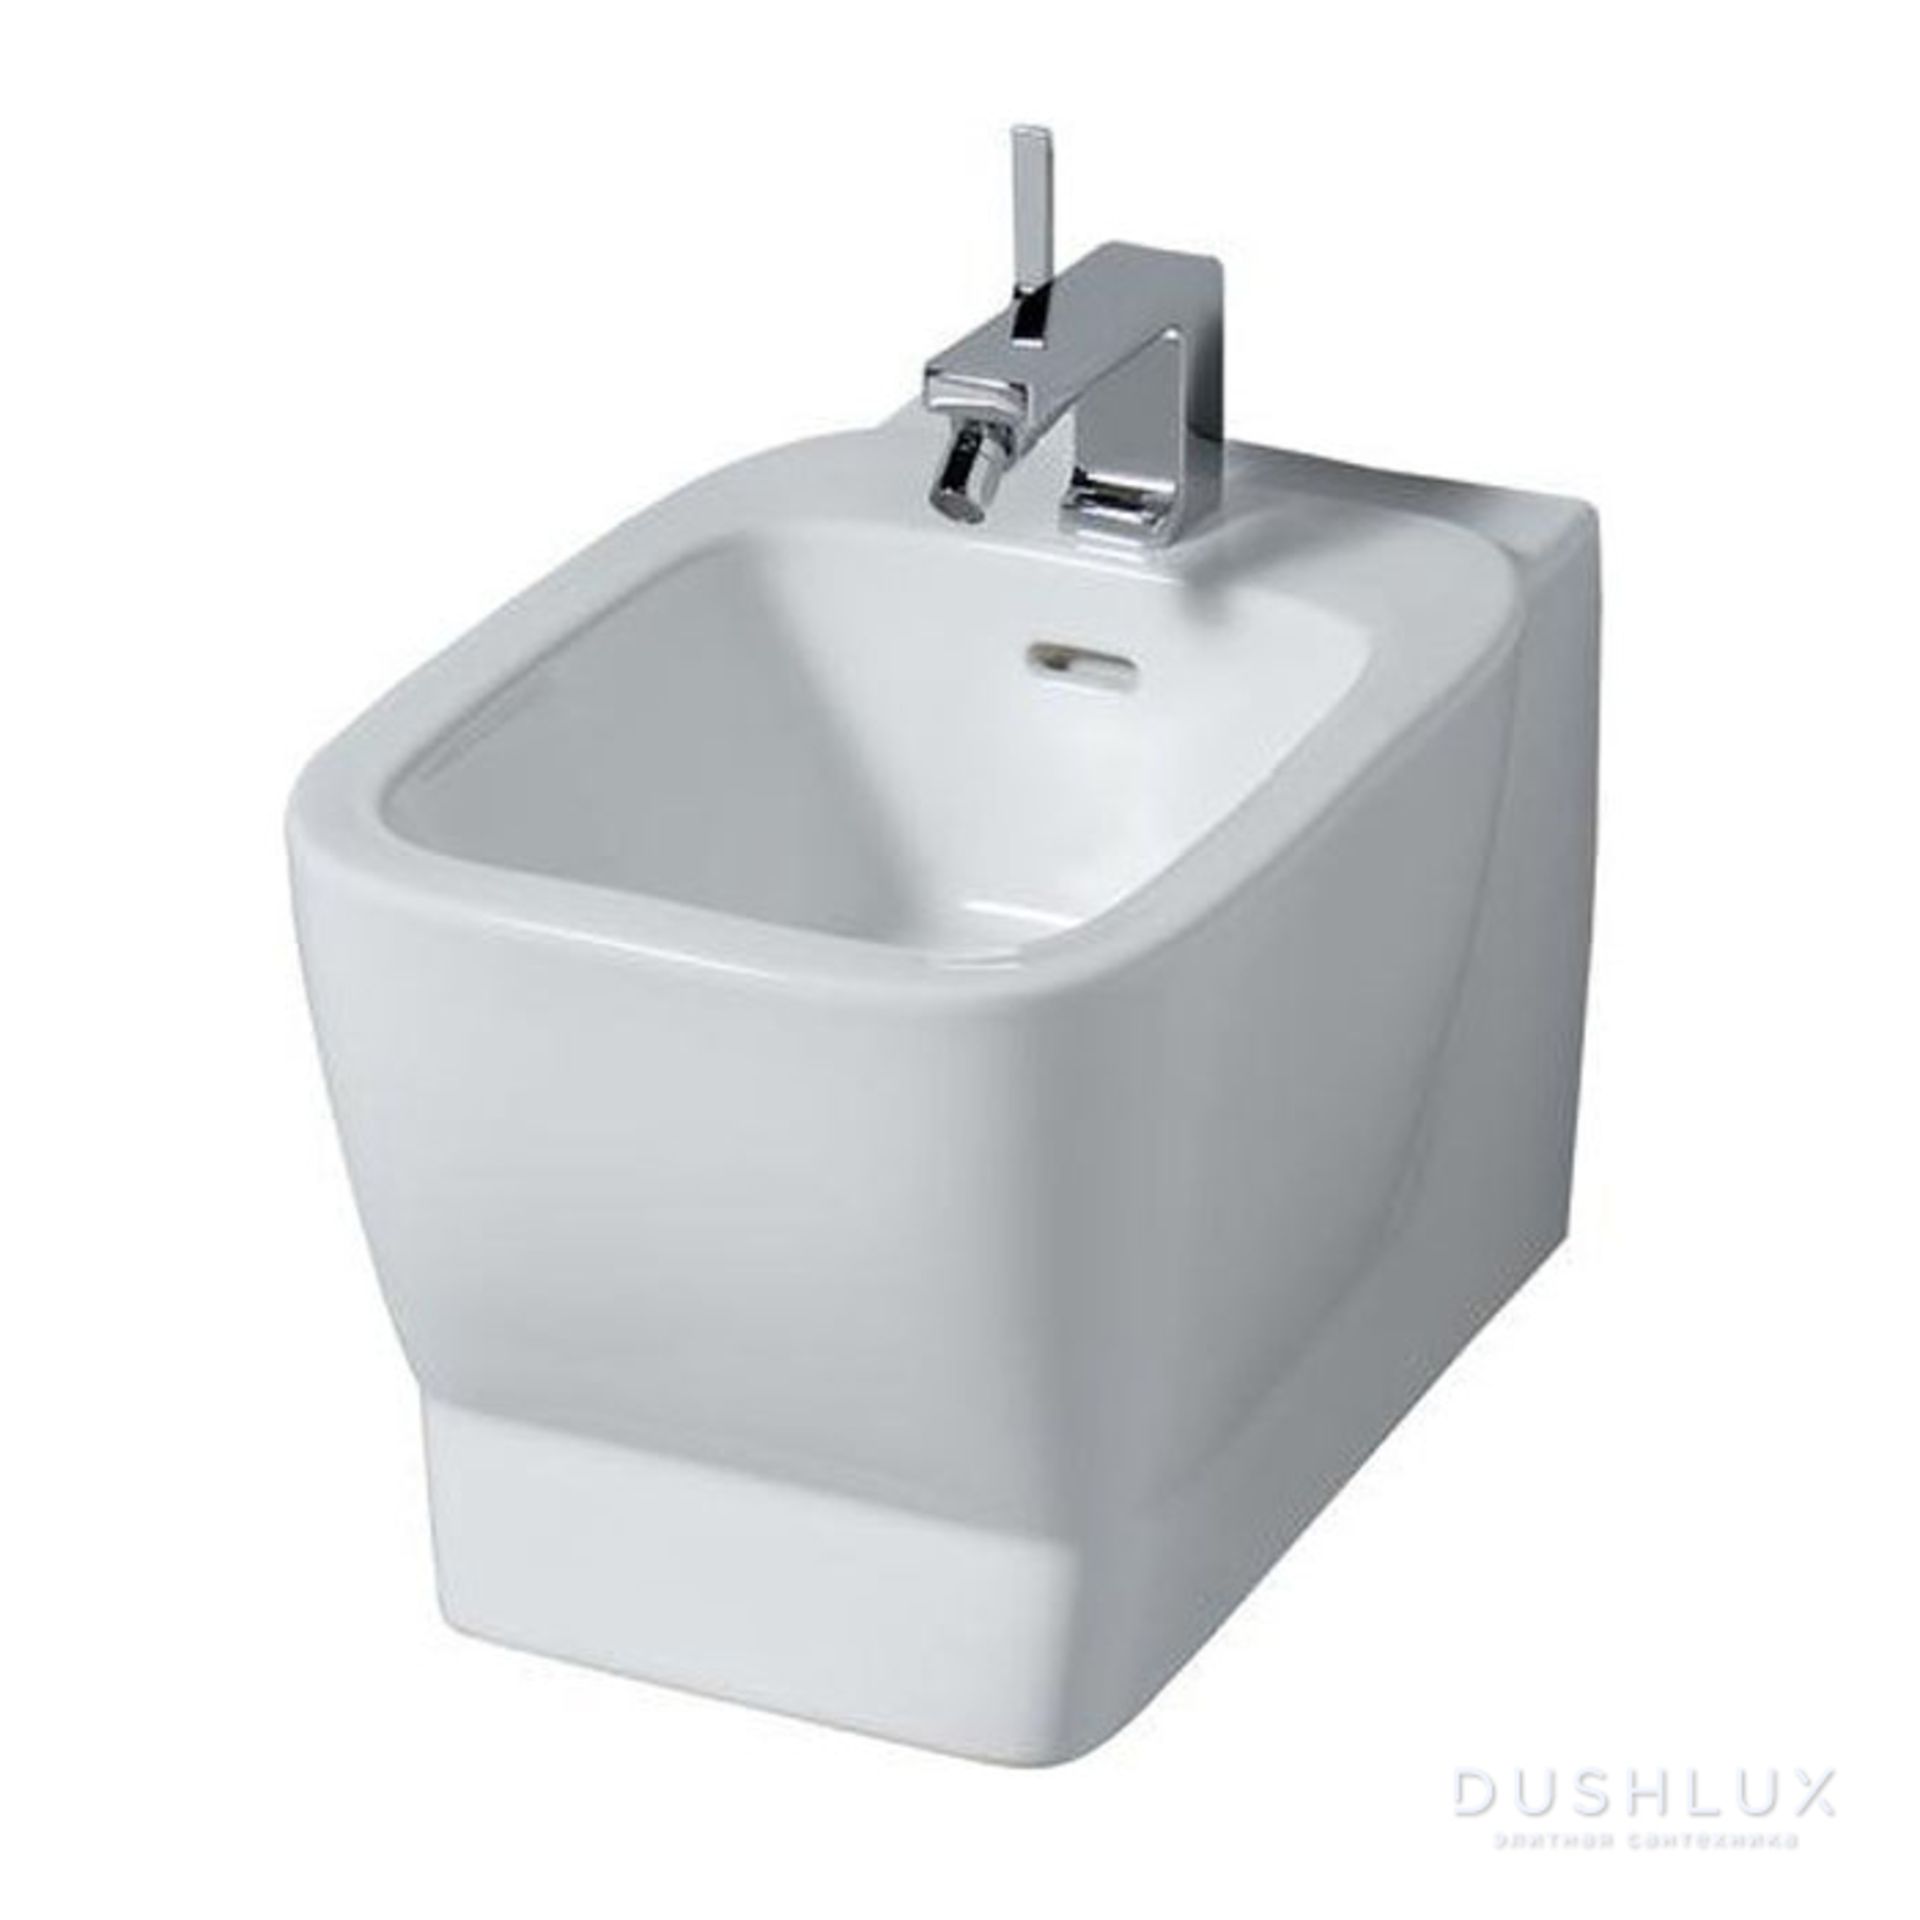 (UR36) Silk 540mm Bidet. RRP £369.99.The Silk bathroom collection is packed with many thoughtf... - Image 2 of 4